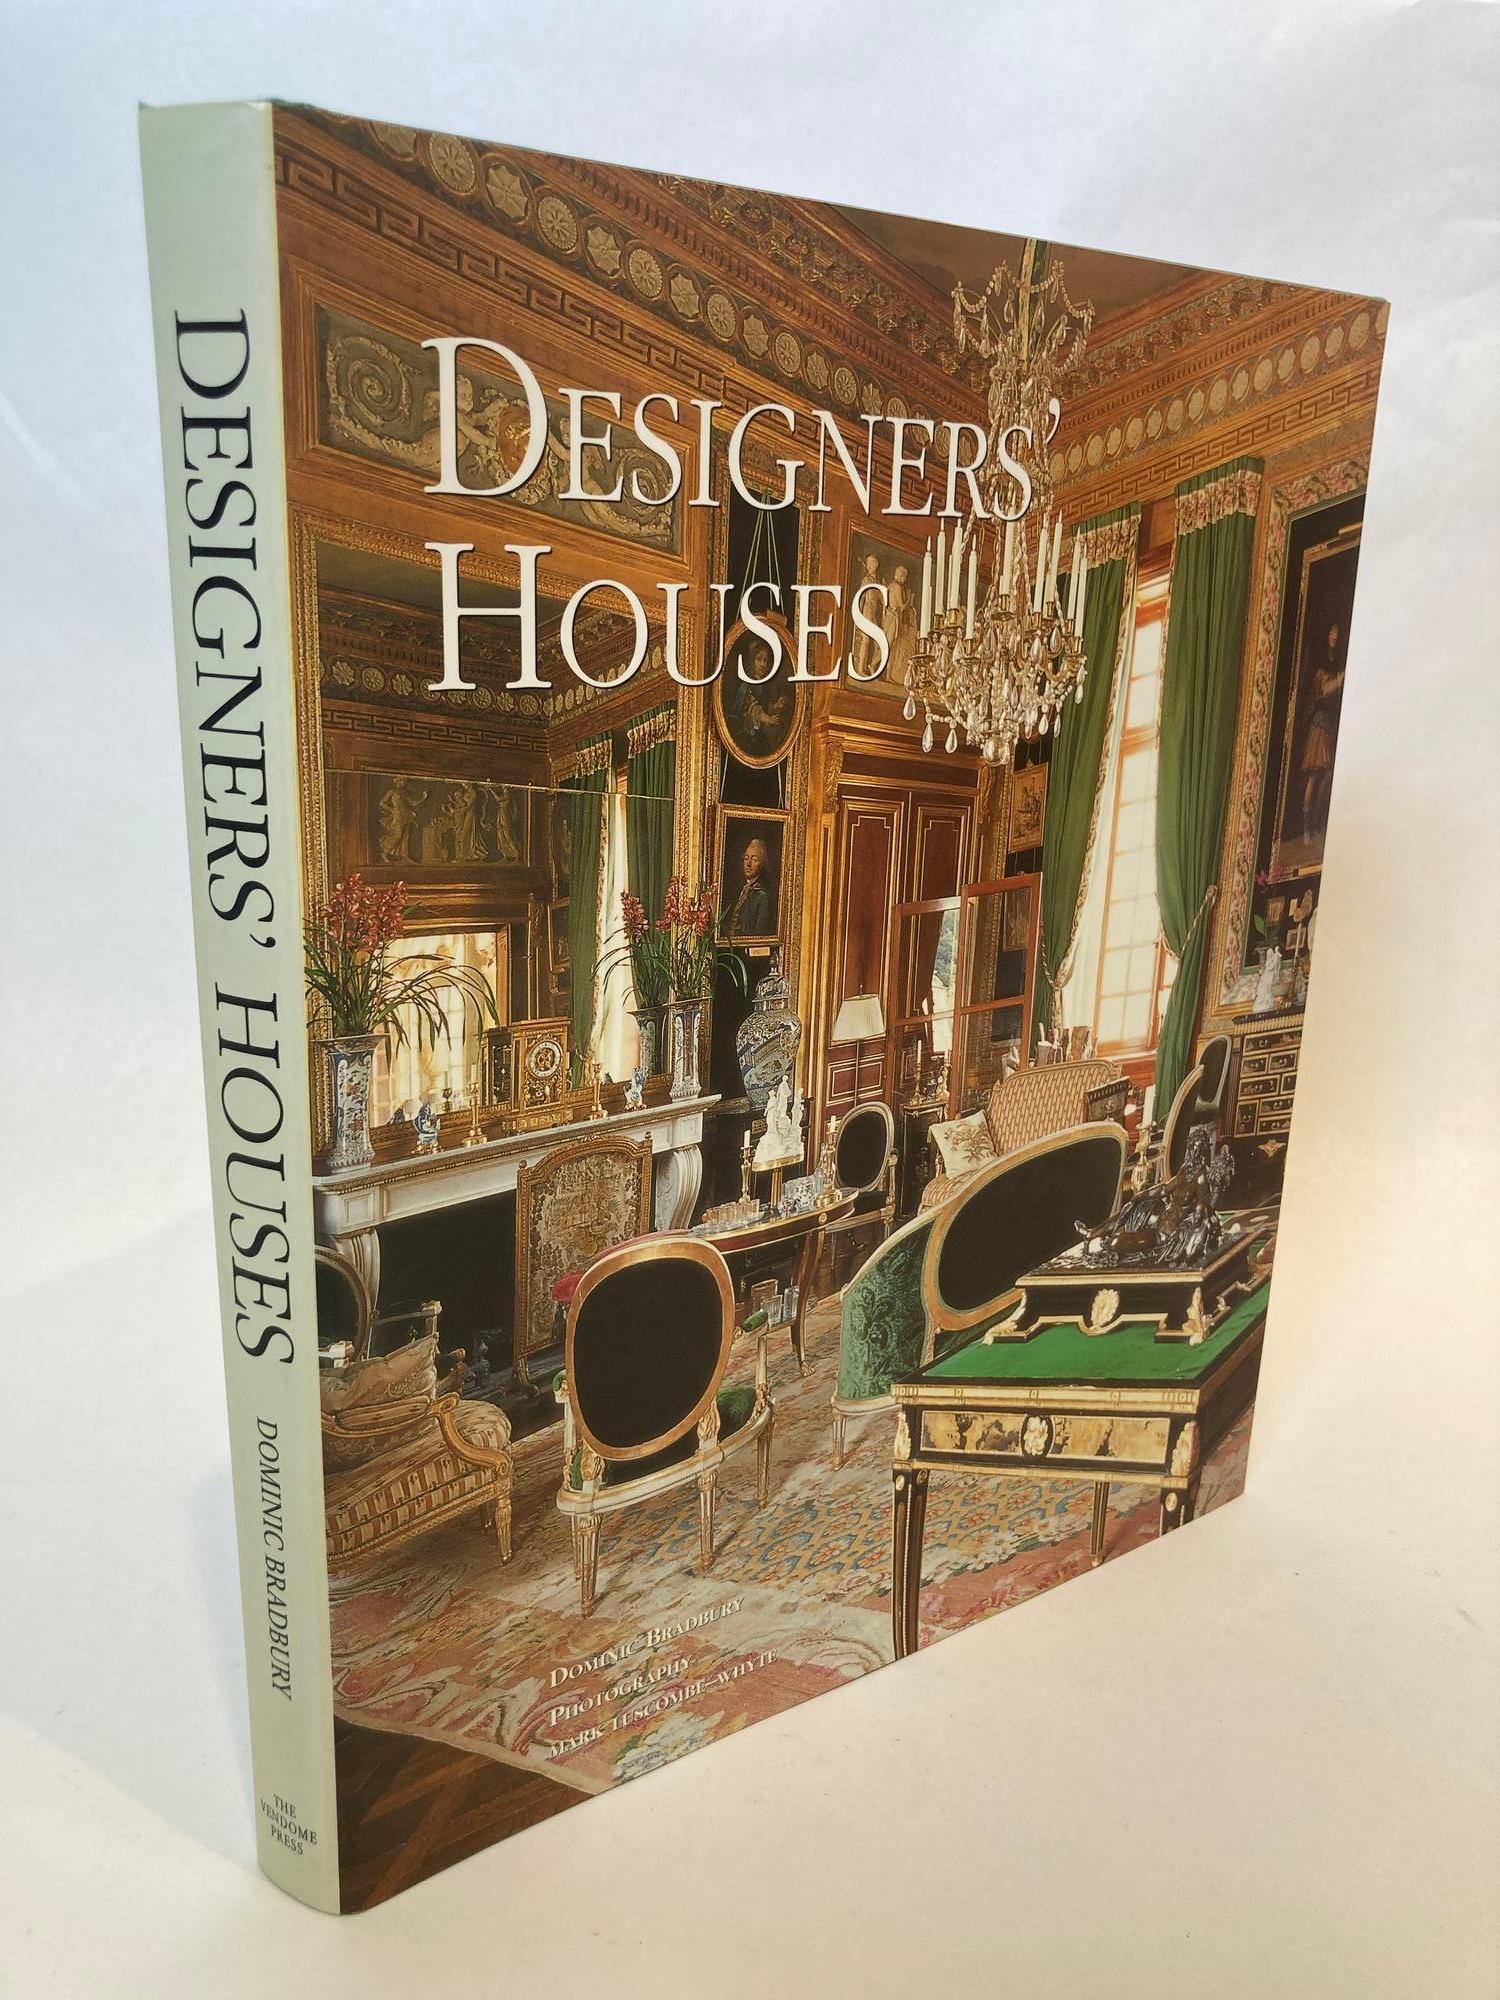 Designers' Houses Hardcover book First Edition By Dominic Bradbury, Mark Luscombe-Whyte (photographer) 2001.The First Edition of Designers' Houses Hardcover book By Dominic Bradbury and Mark Luscombe-Whyte (photographer) published in 2001, Focuses